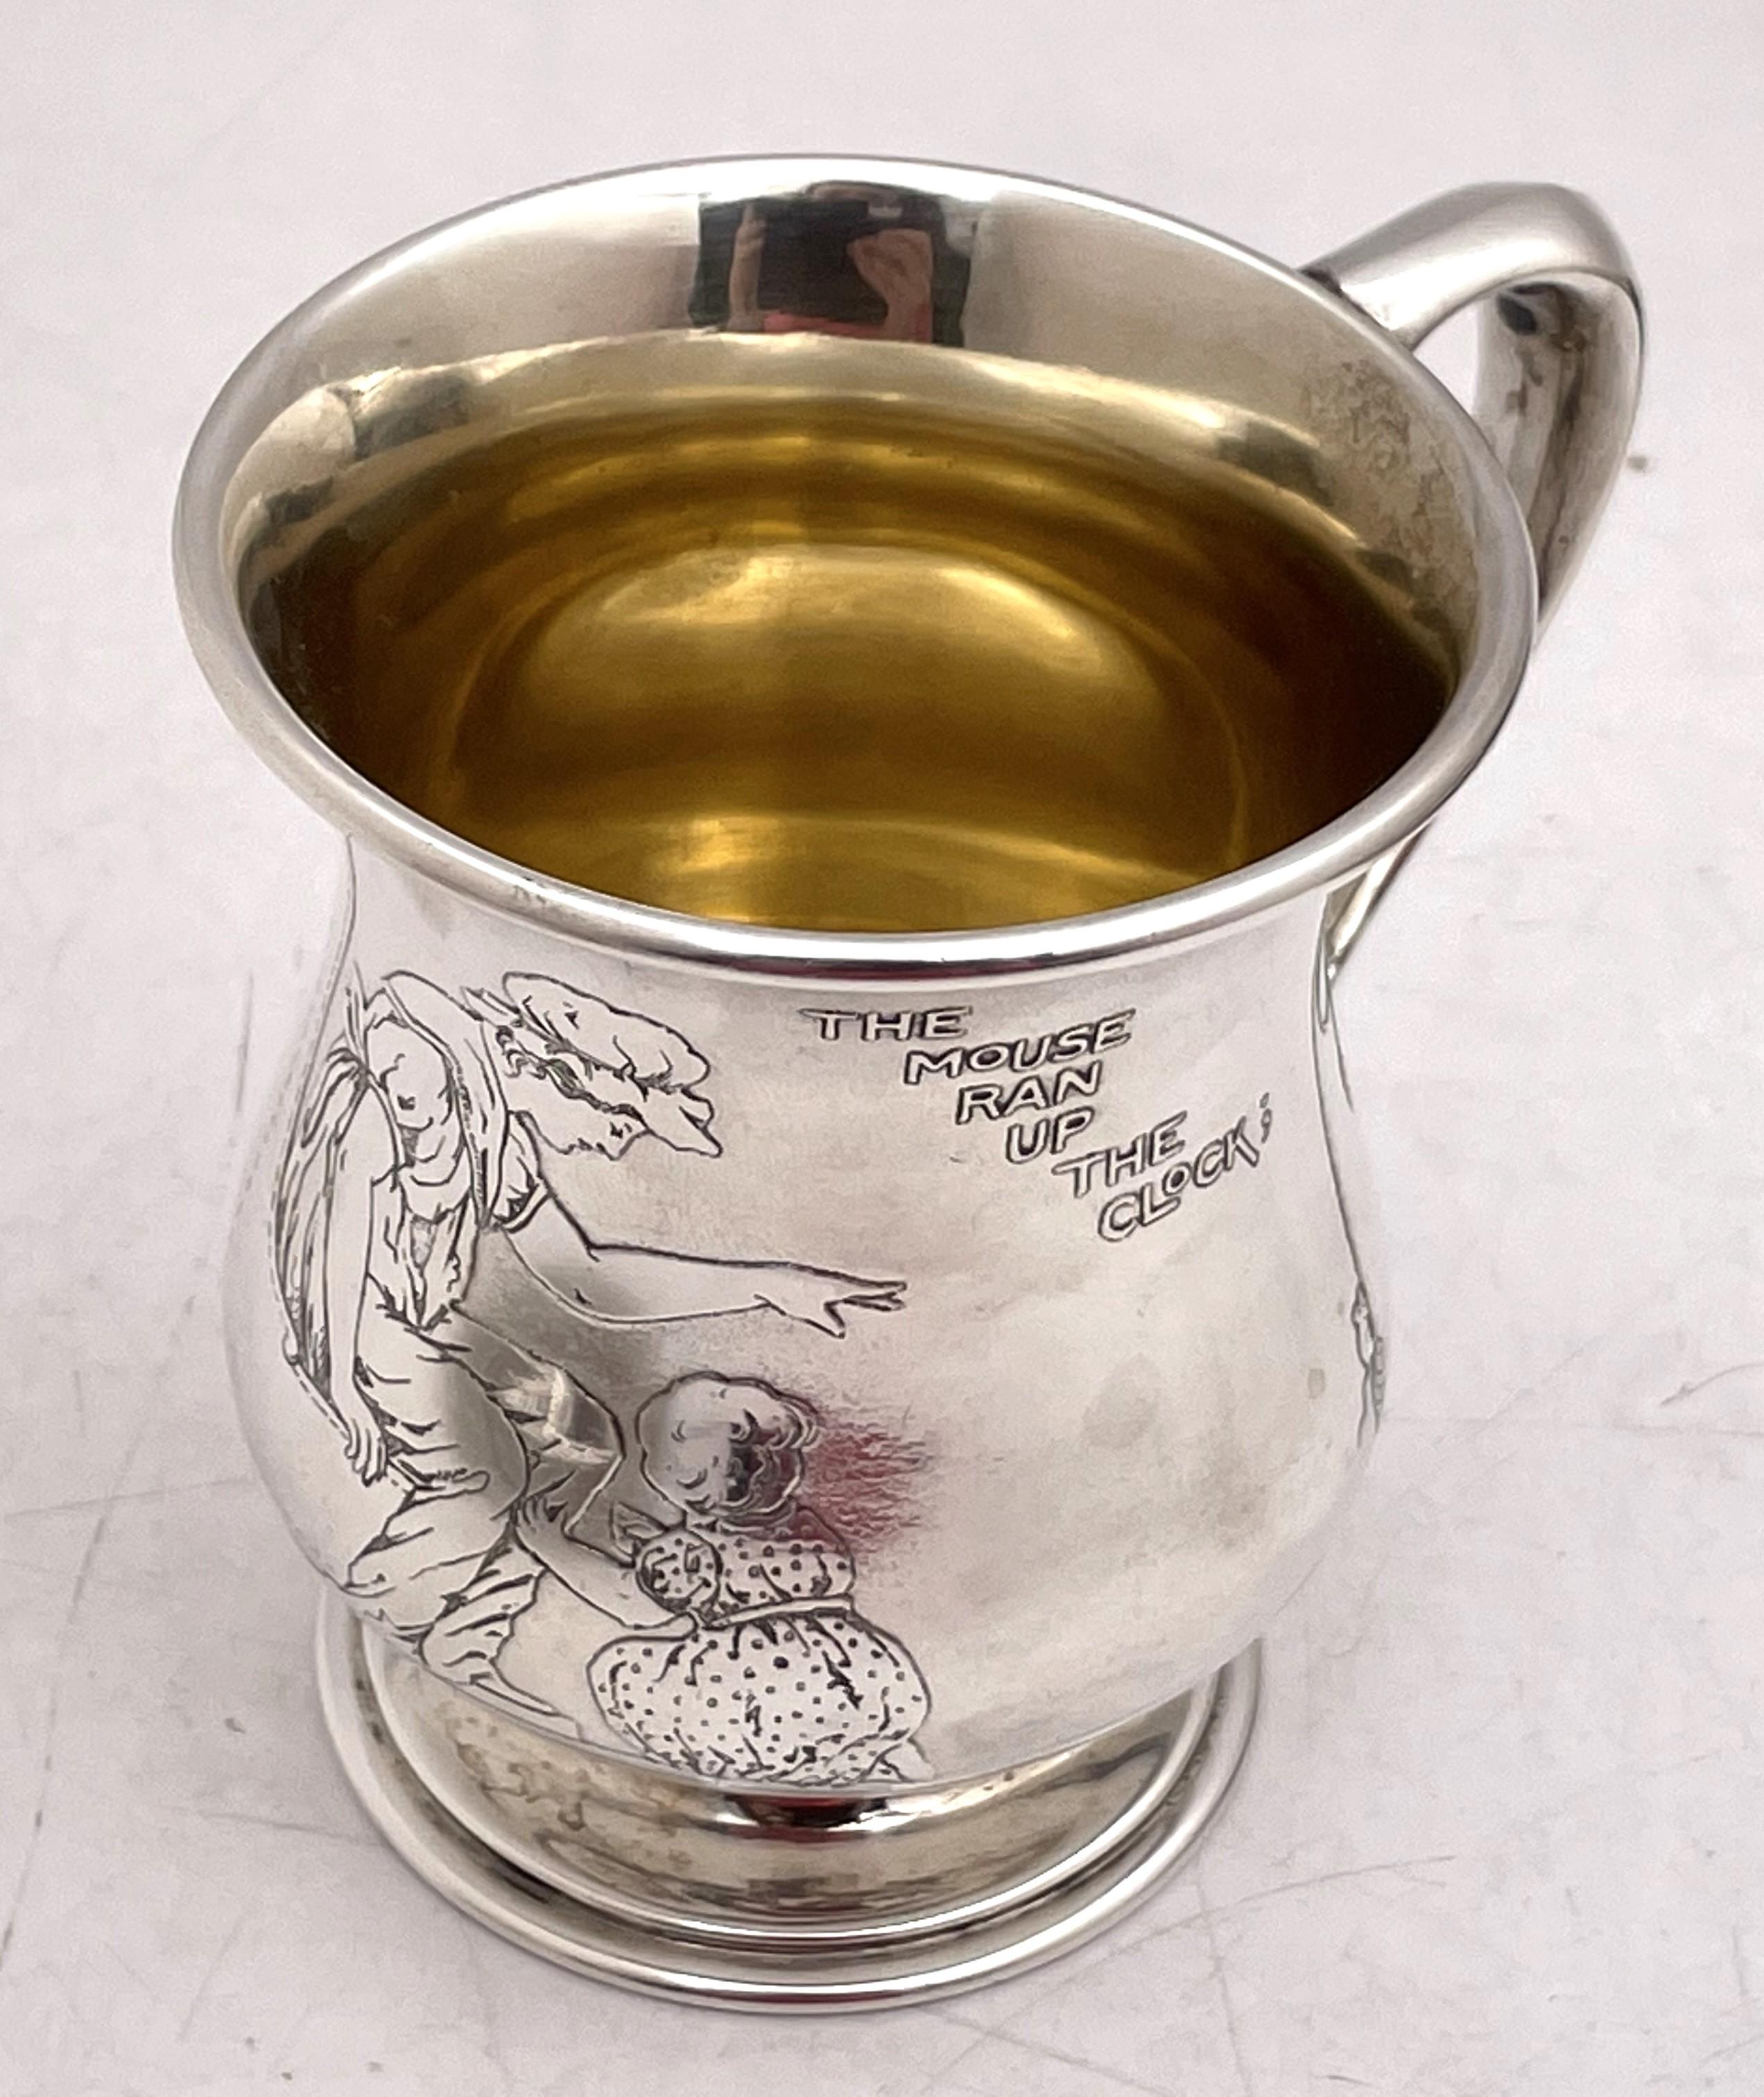 Tiffany & Co. sterling silver child mug, gilt inside, in pattern number 17139 from 1908, showcasing a mother and child, a mouse running up a clock as well as other beautiful motifs. It measures 3 1/2'' in height by 2 7/8'' in diameter at the top (3